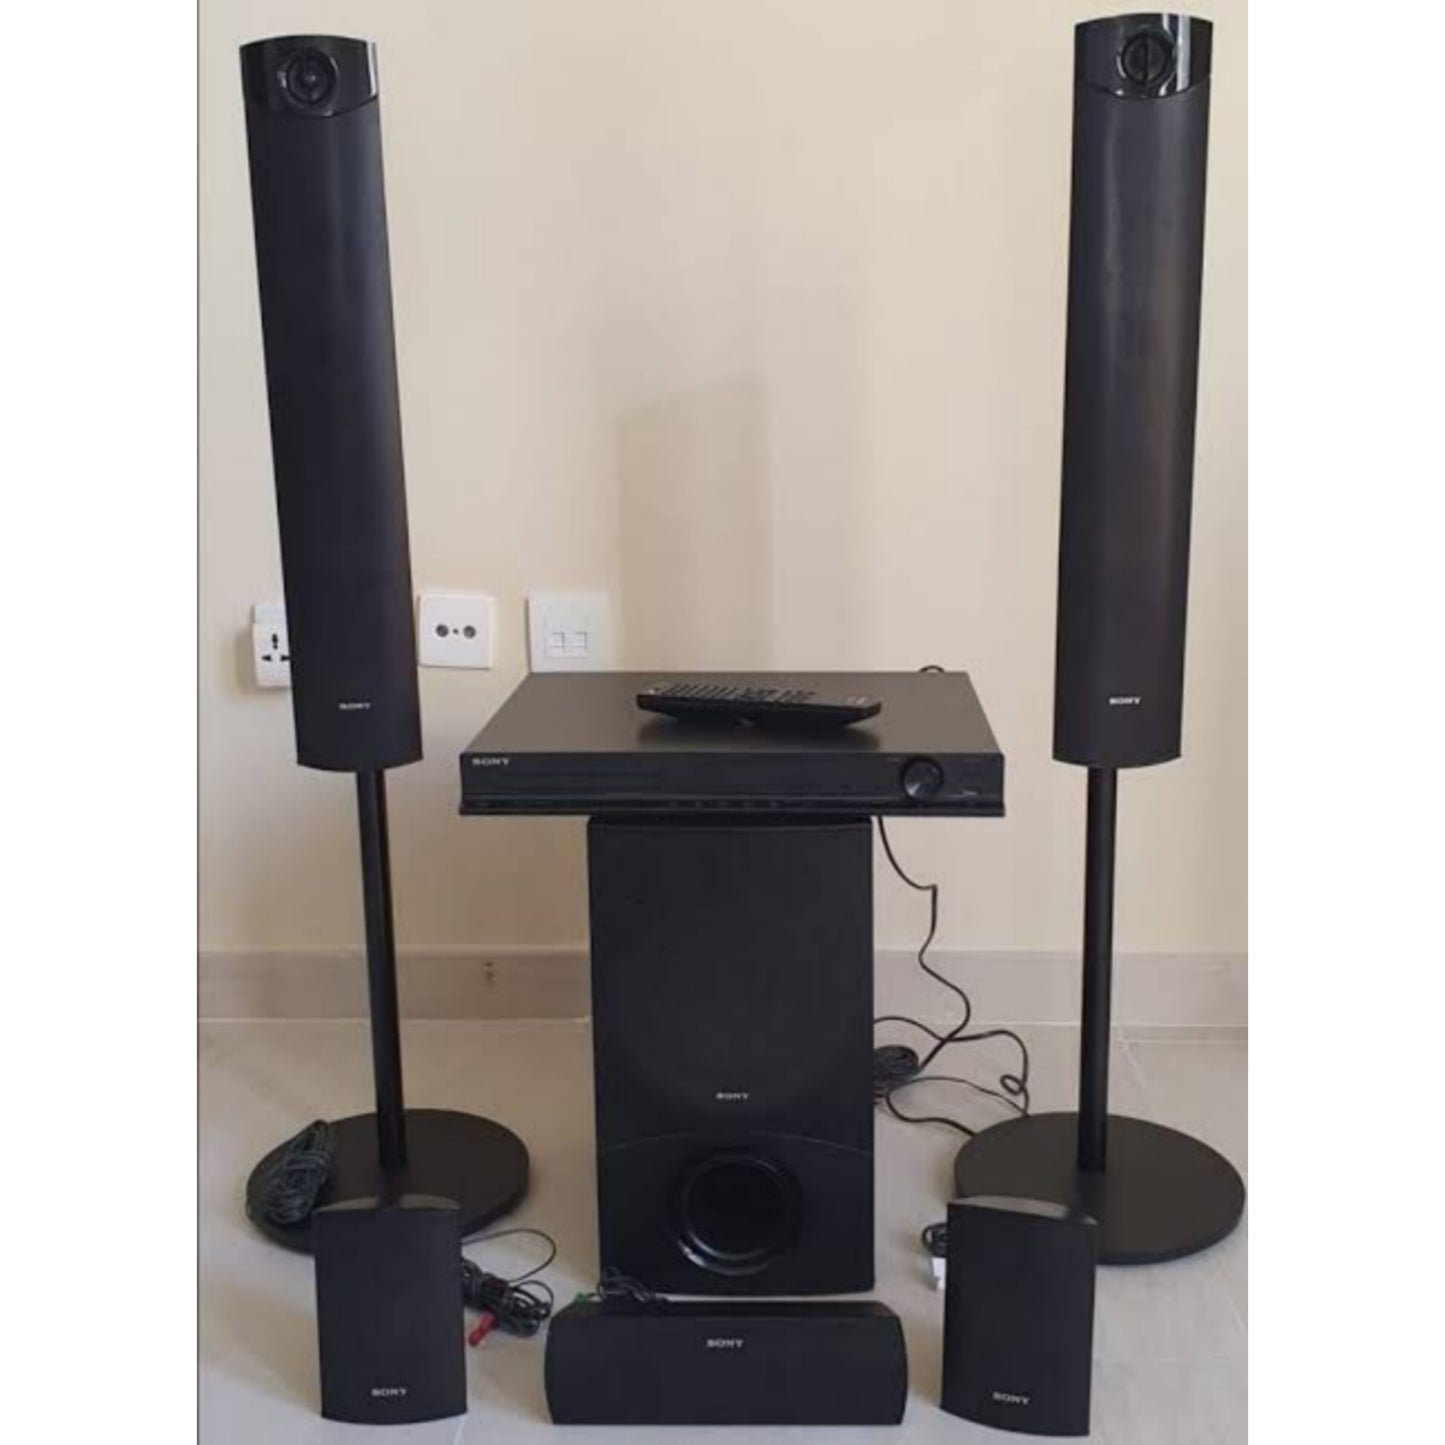 Sony DAV-DZ640K 5.1Ch 1000 watts Standing DVD Home Theater System - Foreign Used